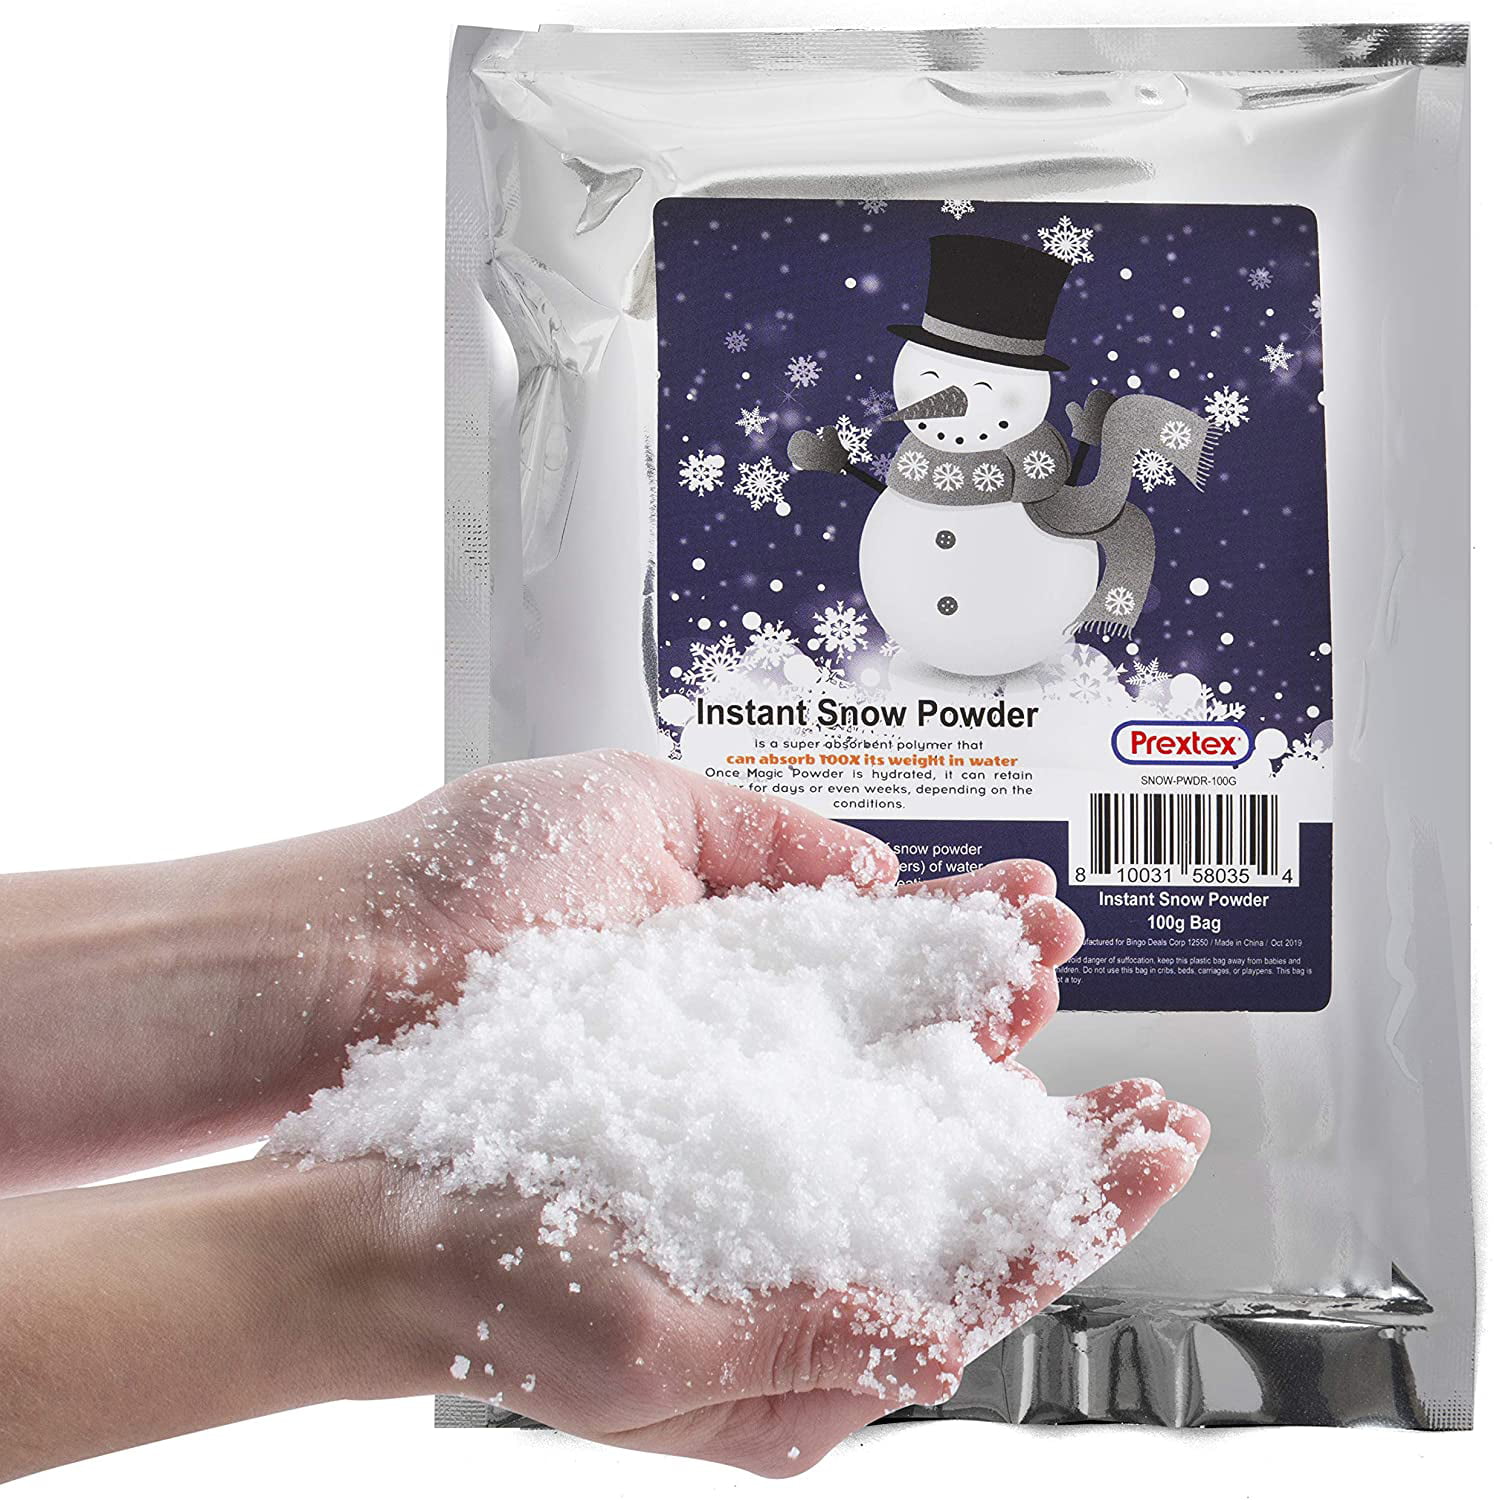 Prextex Instant Snow Powder - Makes 2 Gallons of Artificial Snow - Perfect for Winter Decoration, Village Displays, Holiday Crafts and Fake Snow